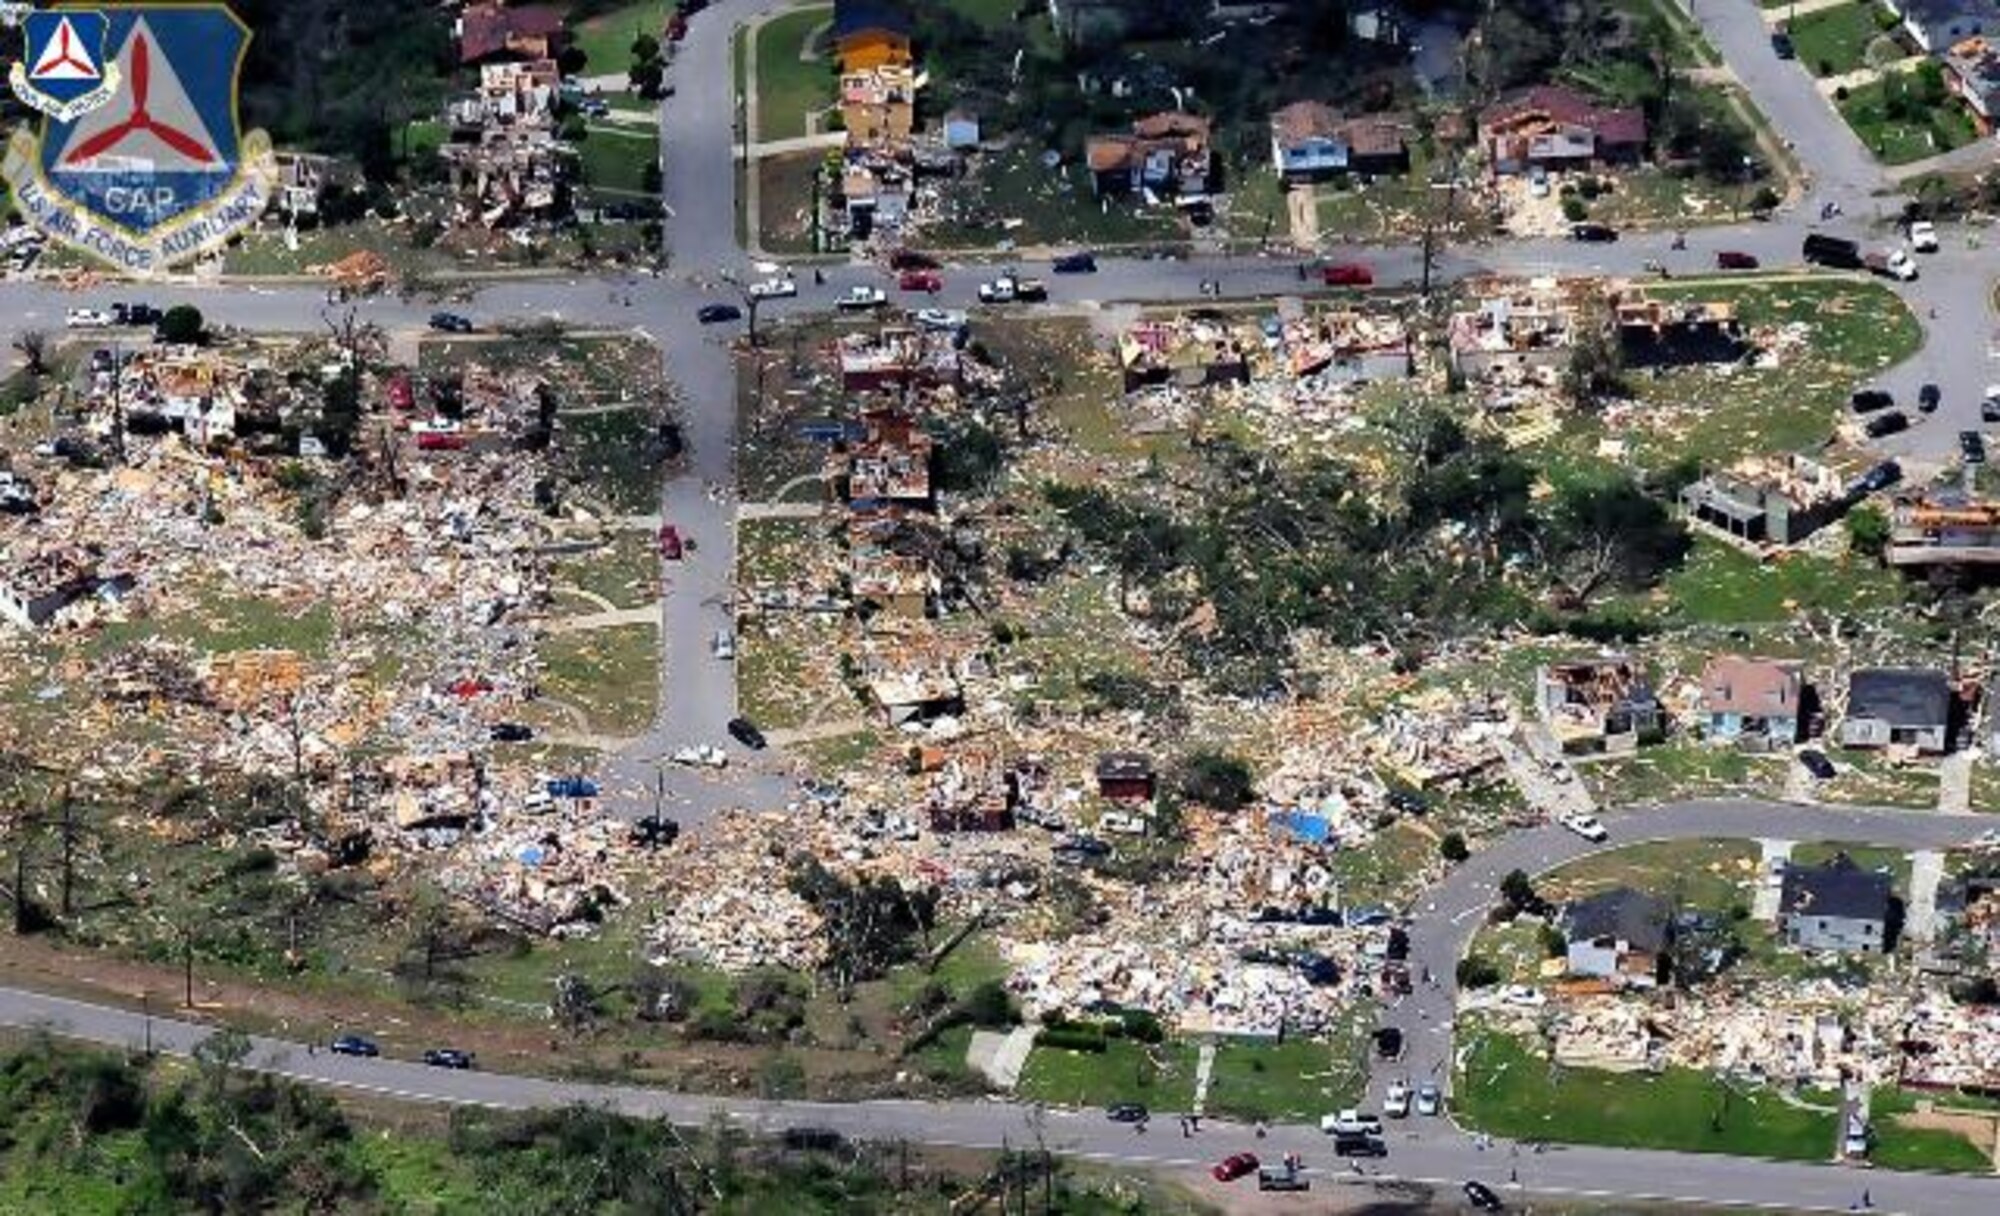 The Civil Air Patrol, flying as the Air Force Auxiliary, took this image in Jefferson County in Alabama April 29. Tornadoes devastated the Southeast April 27, killing more than 300 people and causing extensive property damage. The AFAUX is flying in support of first responders and state and local officials as they assess the damage to the region. (Courtesy photo)